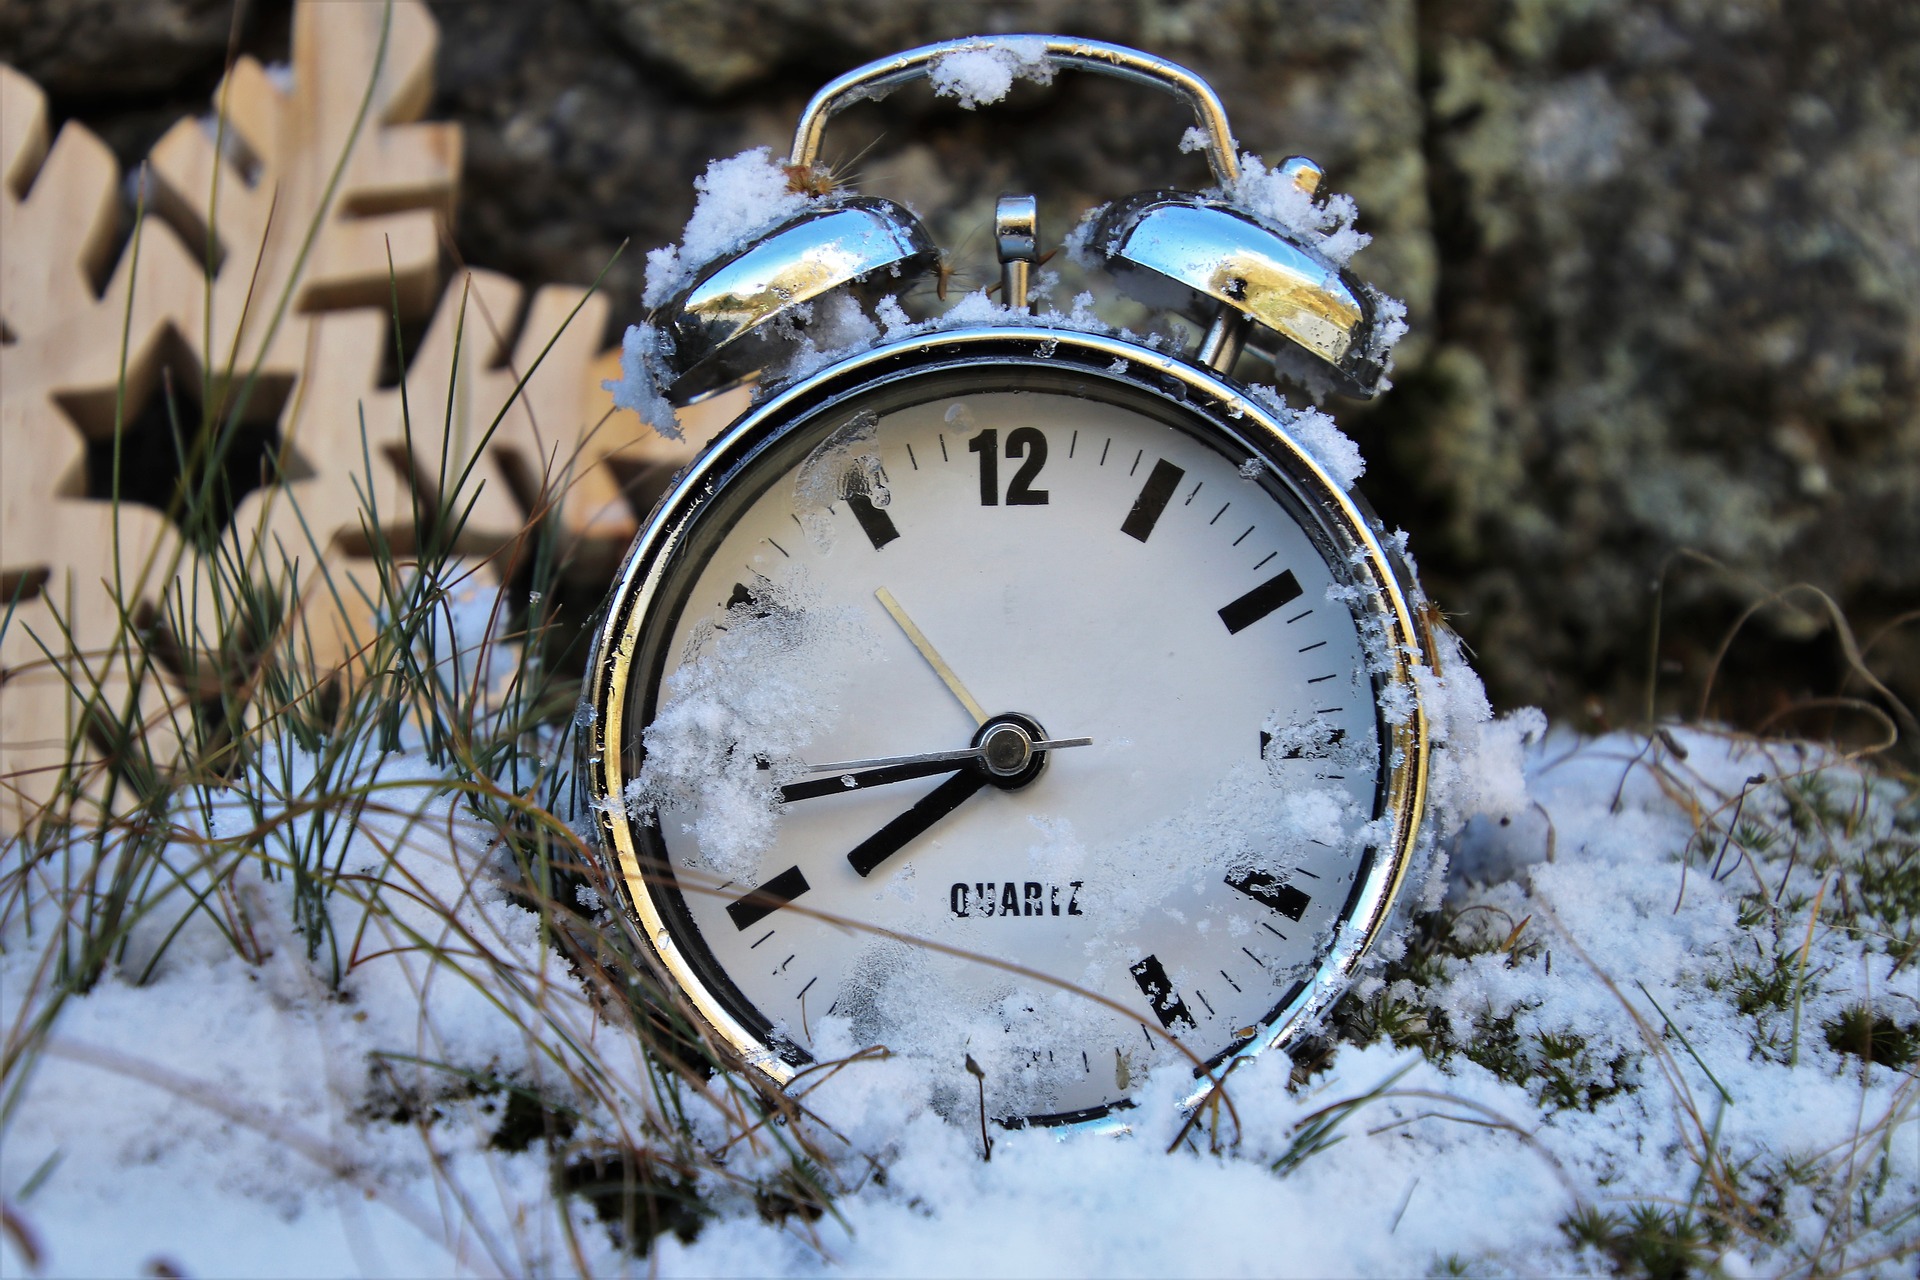 Old fashioned alarm clock in the snow.